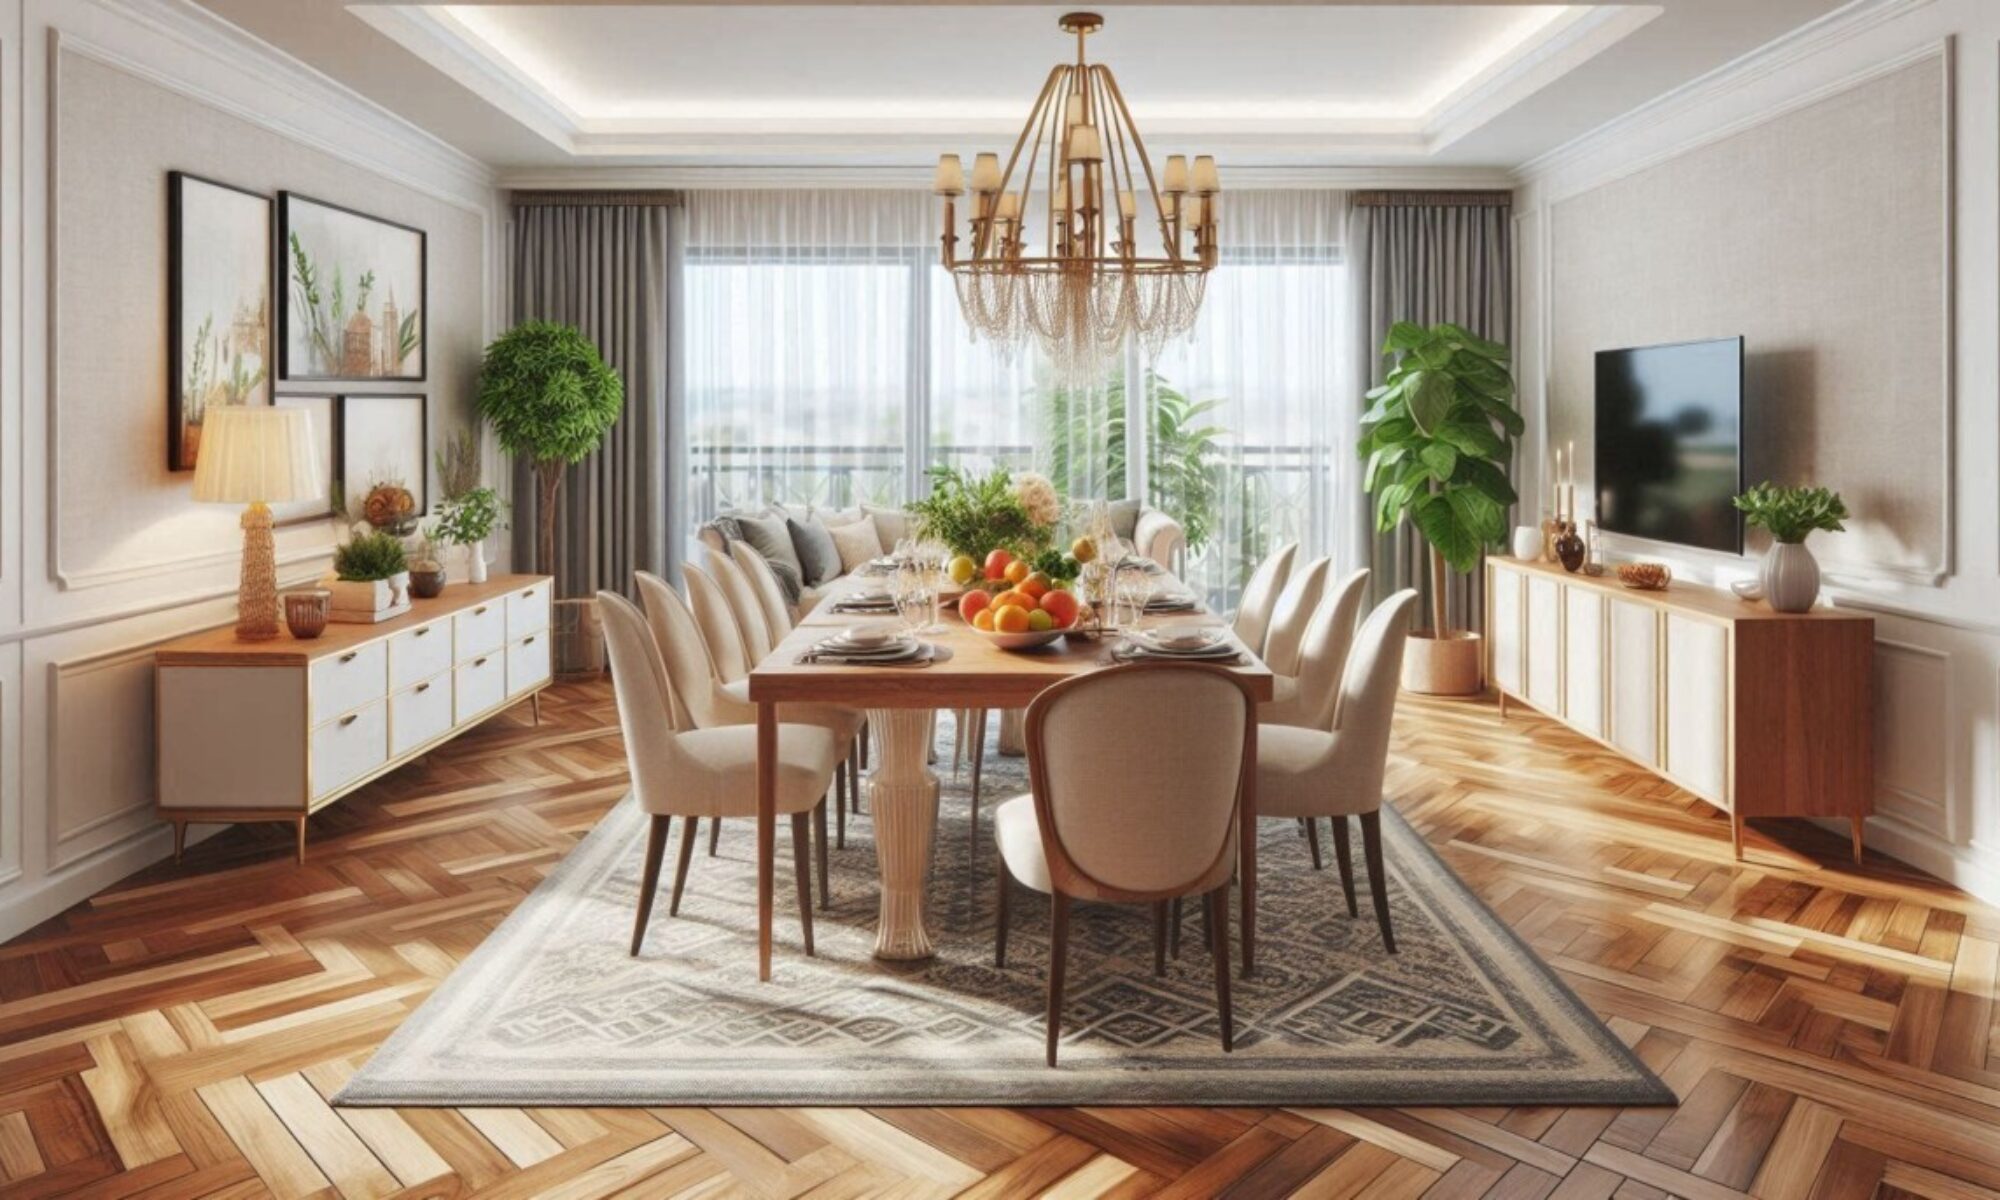 Stagaed Dining Room - This image created by AI for Lew Corcoran, Real Estate Agent, Real Estate Photographer, Home Stager, and FAA Licensed Drone Pilot